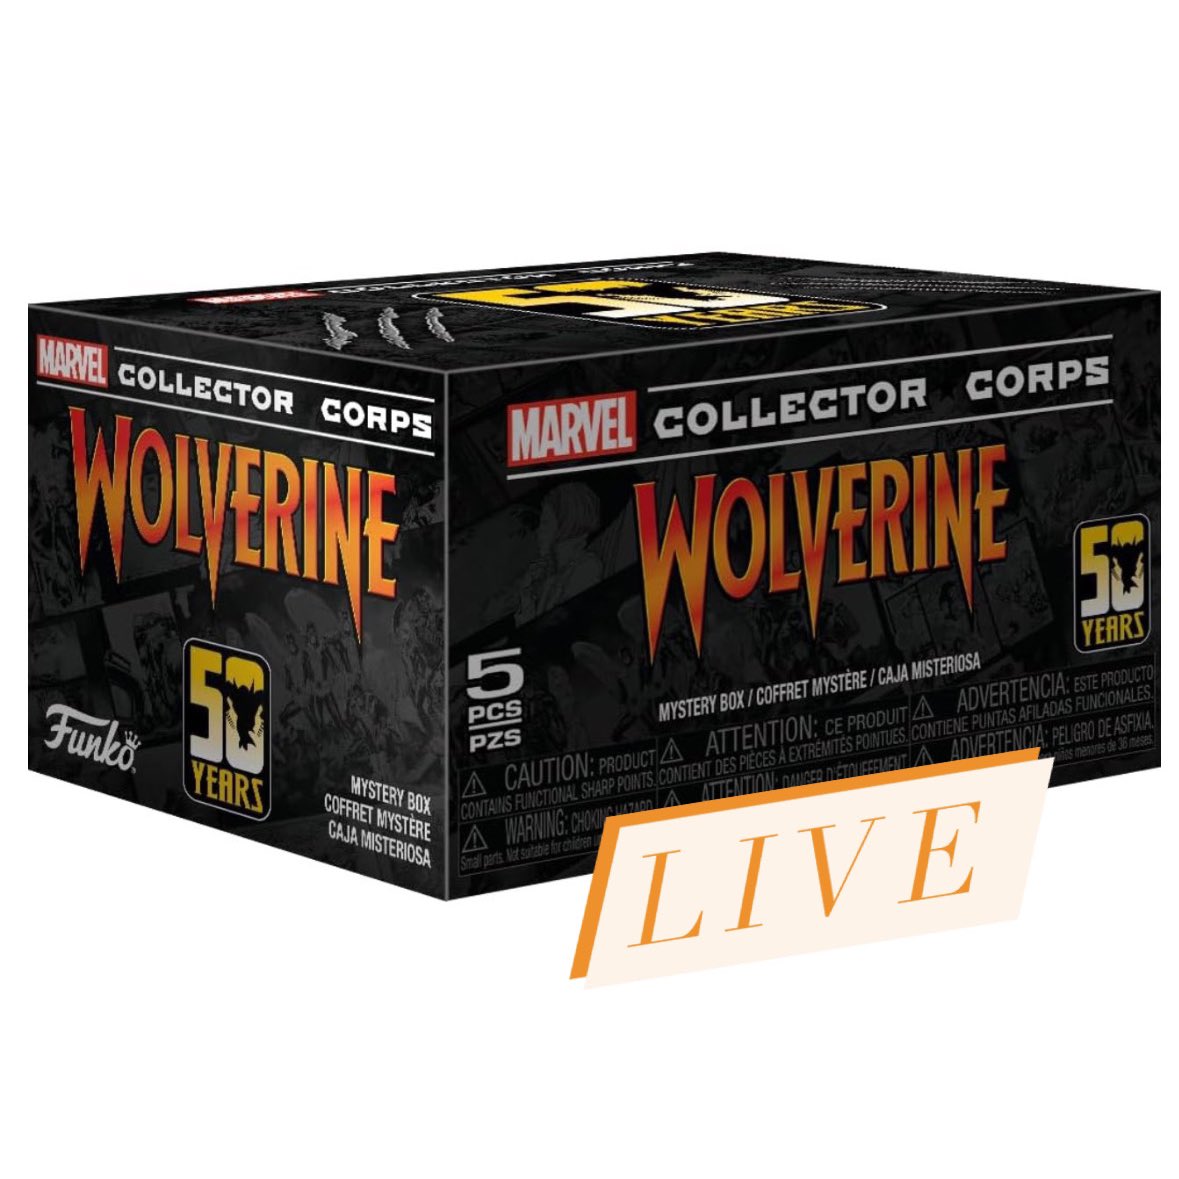 Now live ~ Wolverine fans, the next Collector Corps box is based on your favorite clawed character. Grab it below!
Linky ~ amzn.to/3Y9y4wr
#Ad #Wolverine #FPN #FunkoPOPNews #Funko #POP #POPVinyl #FunkoPOP #FunkoSoda